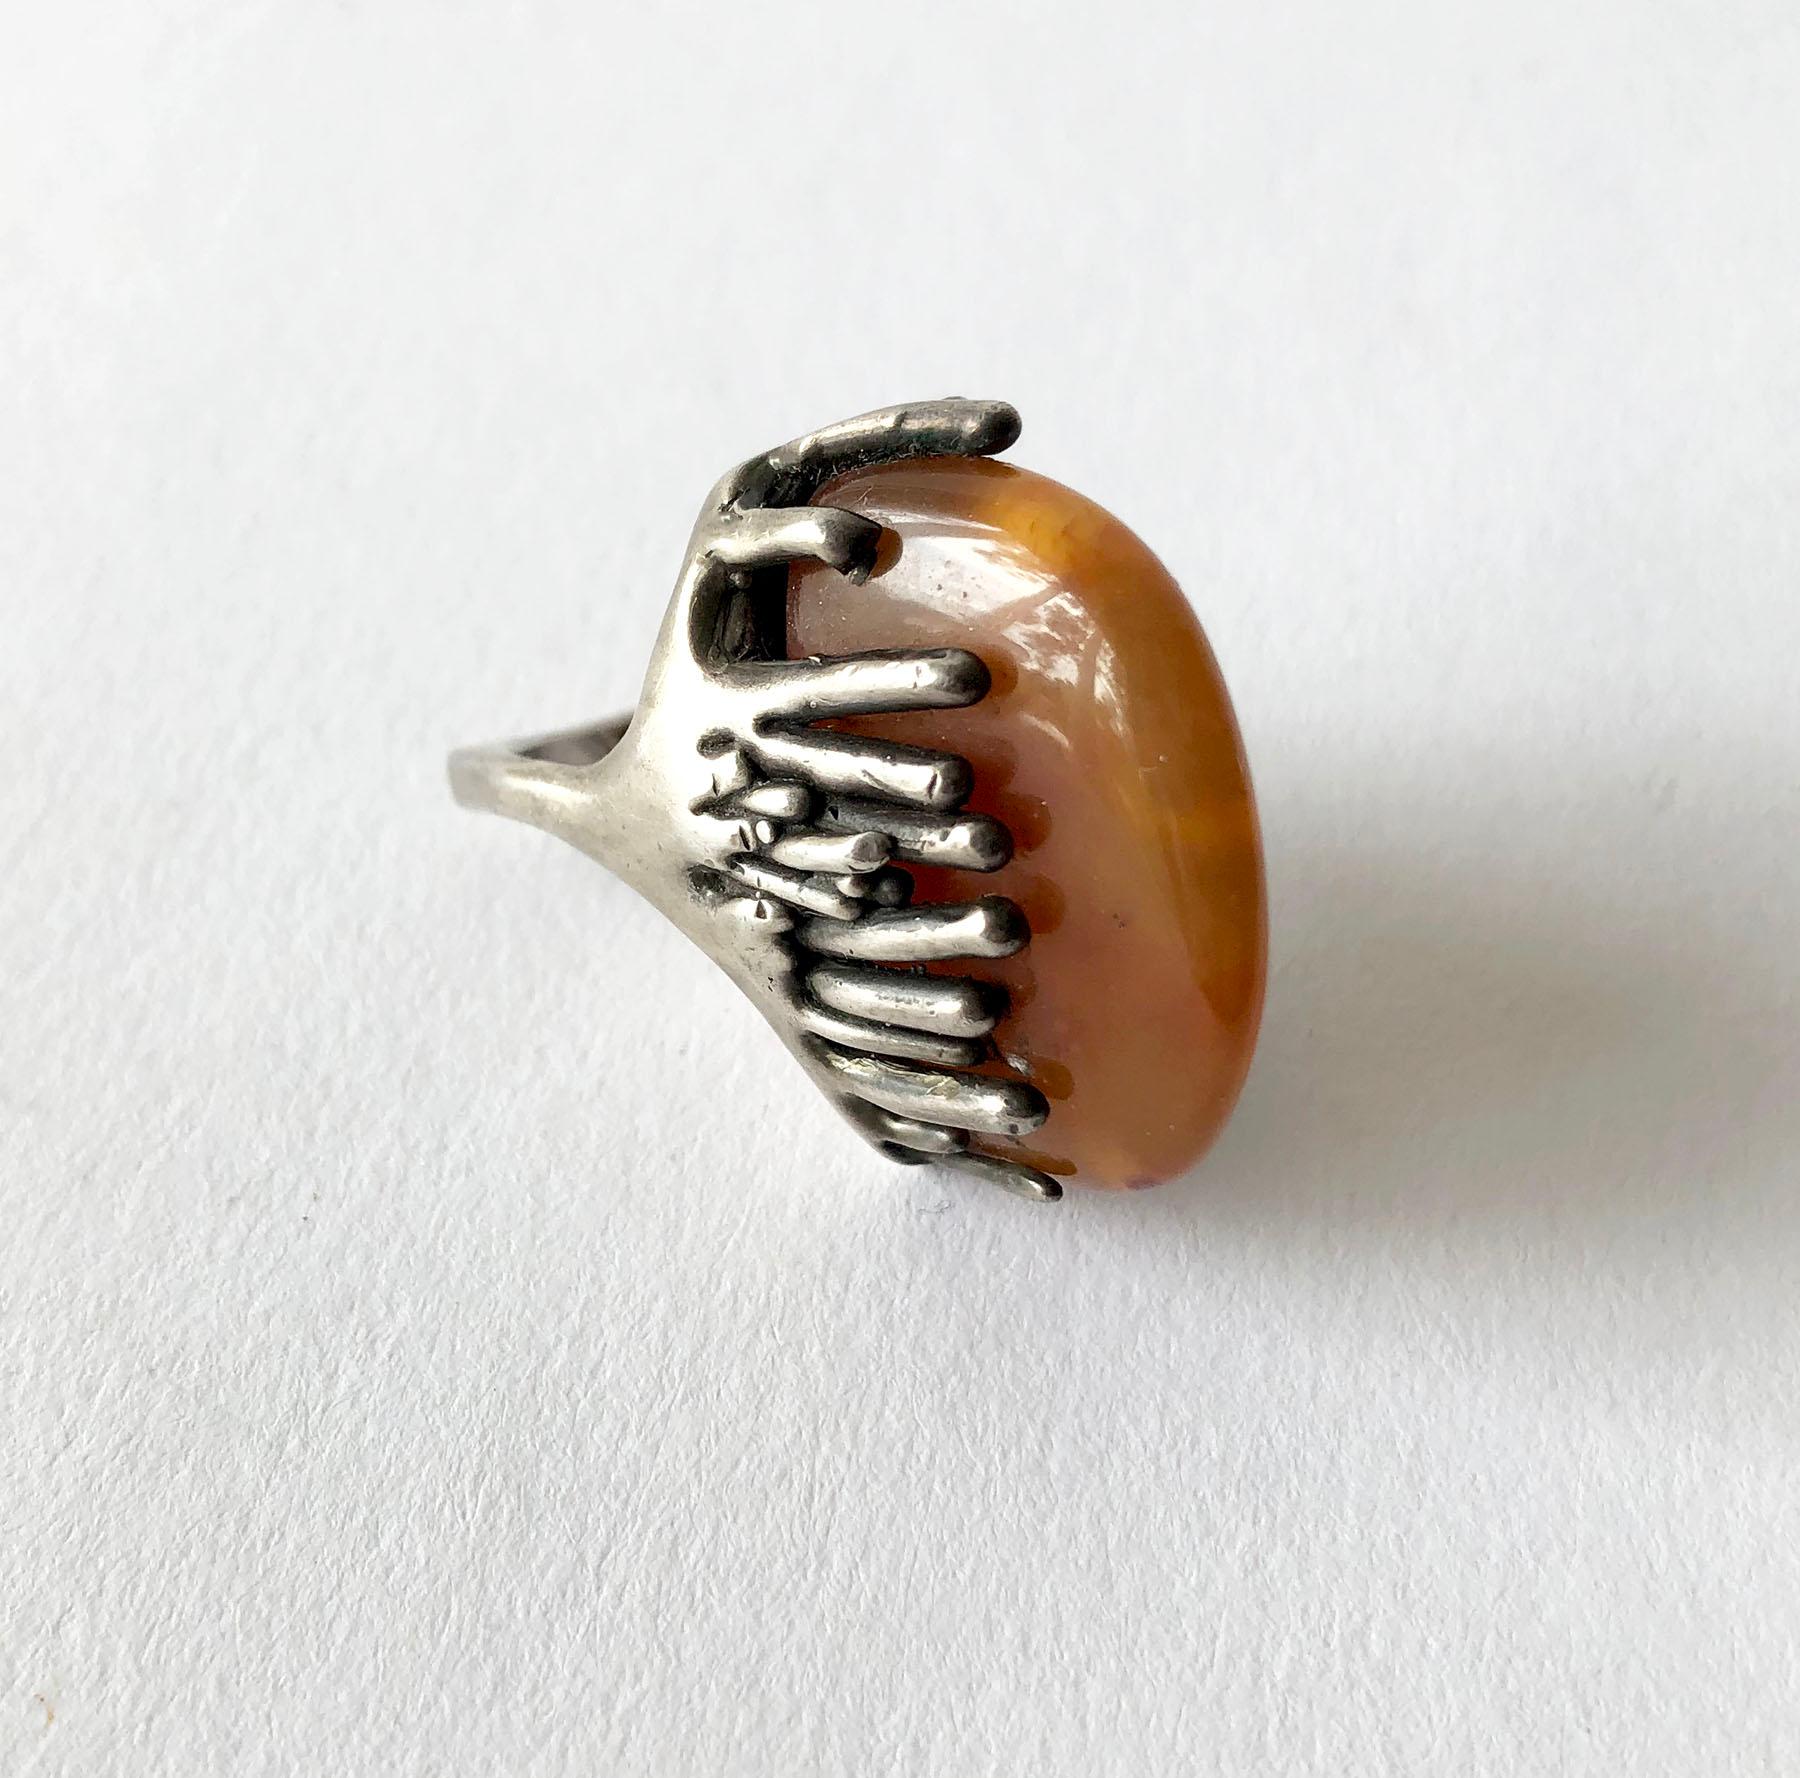 Gorgeous piece of amber in pebble form, set in a brutalist setting of sterling silver made by John M. Morgan of Ellensburg, Washington. Ring is a finger size 6.25 - 6.5 due to its unusual design. The face of the ring measures about 1 1/8